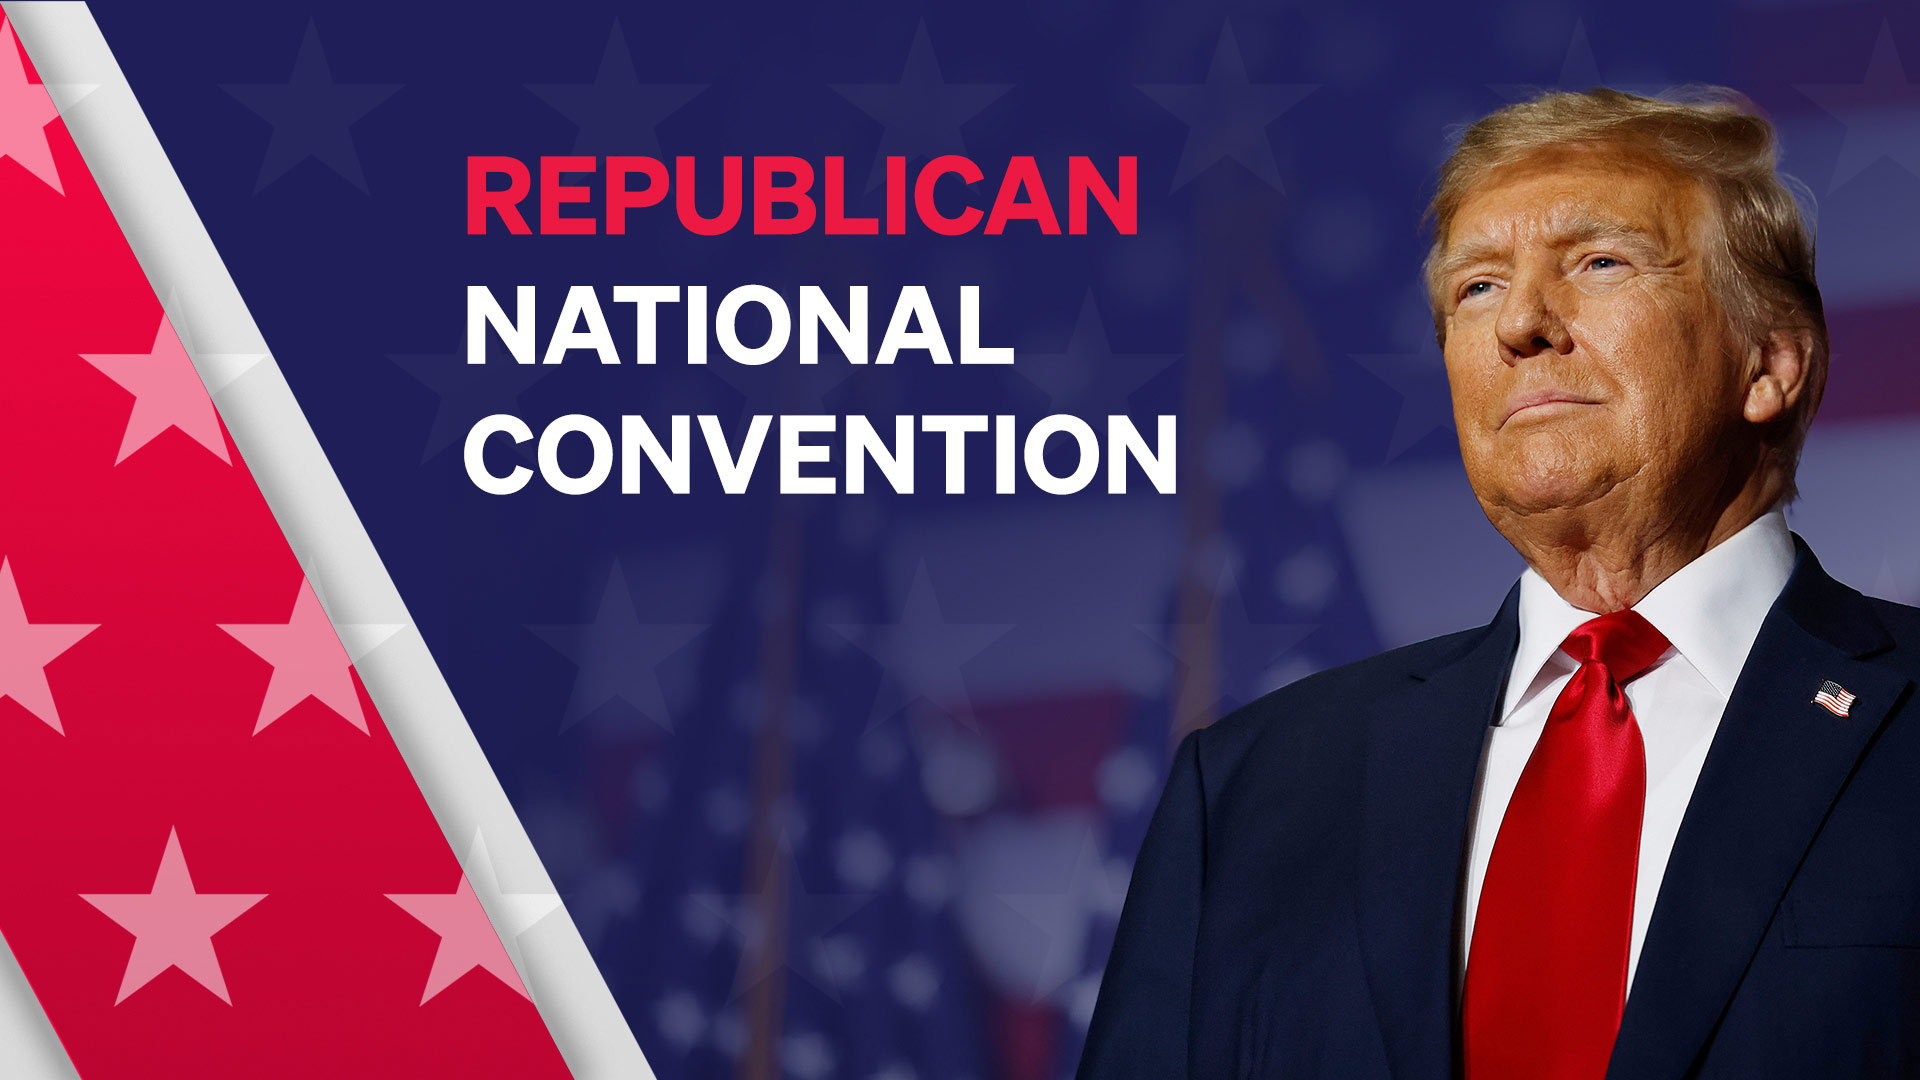 WATCH OR LISTEN LIVE: The Republican National Convention